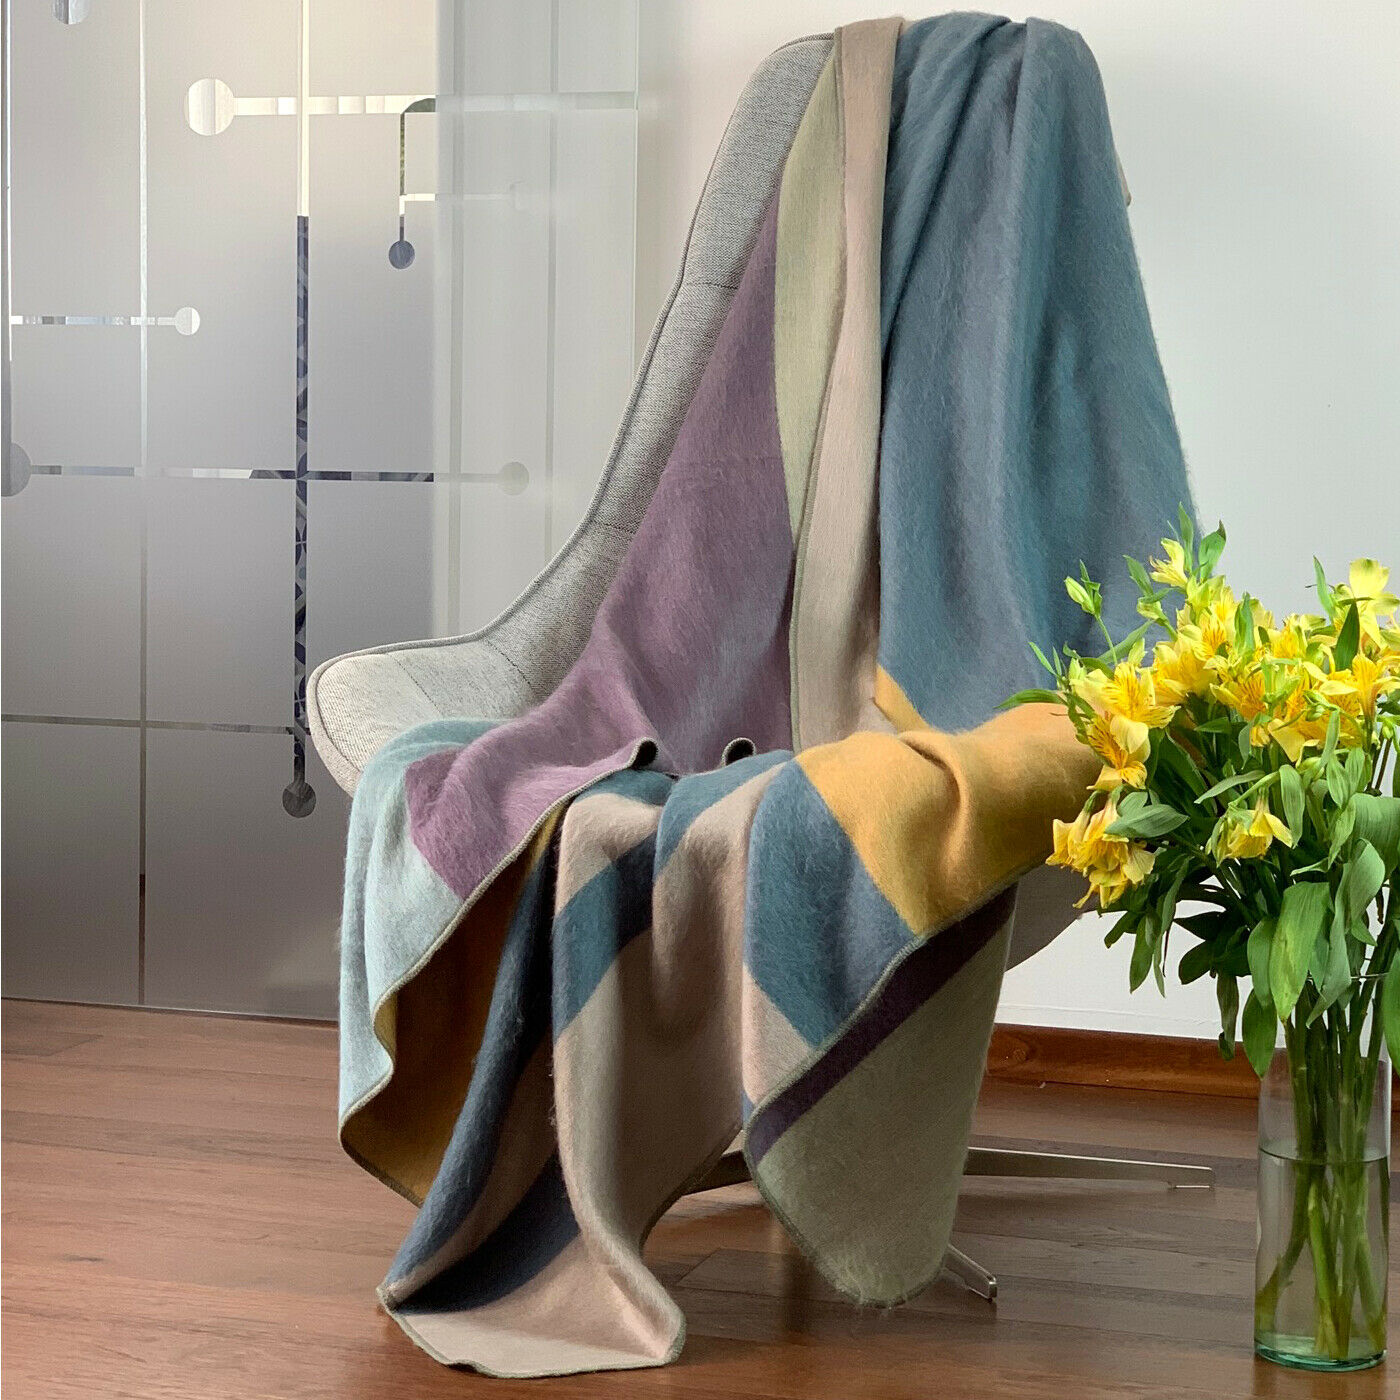 Guamani - Baby Alpaca wool throw blanket / sofa cover - Queen 94" x 62" - reversible double-sided